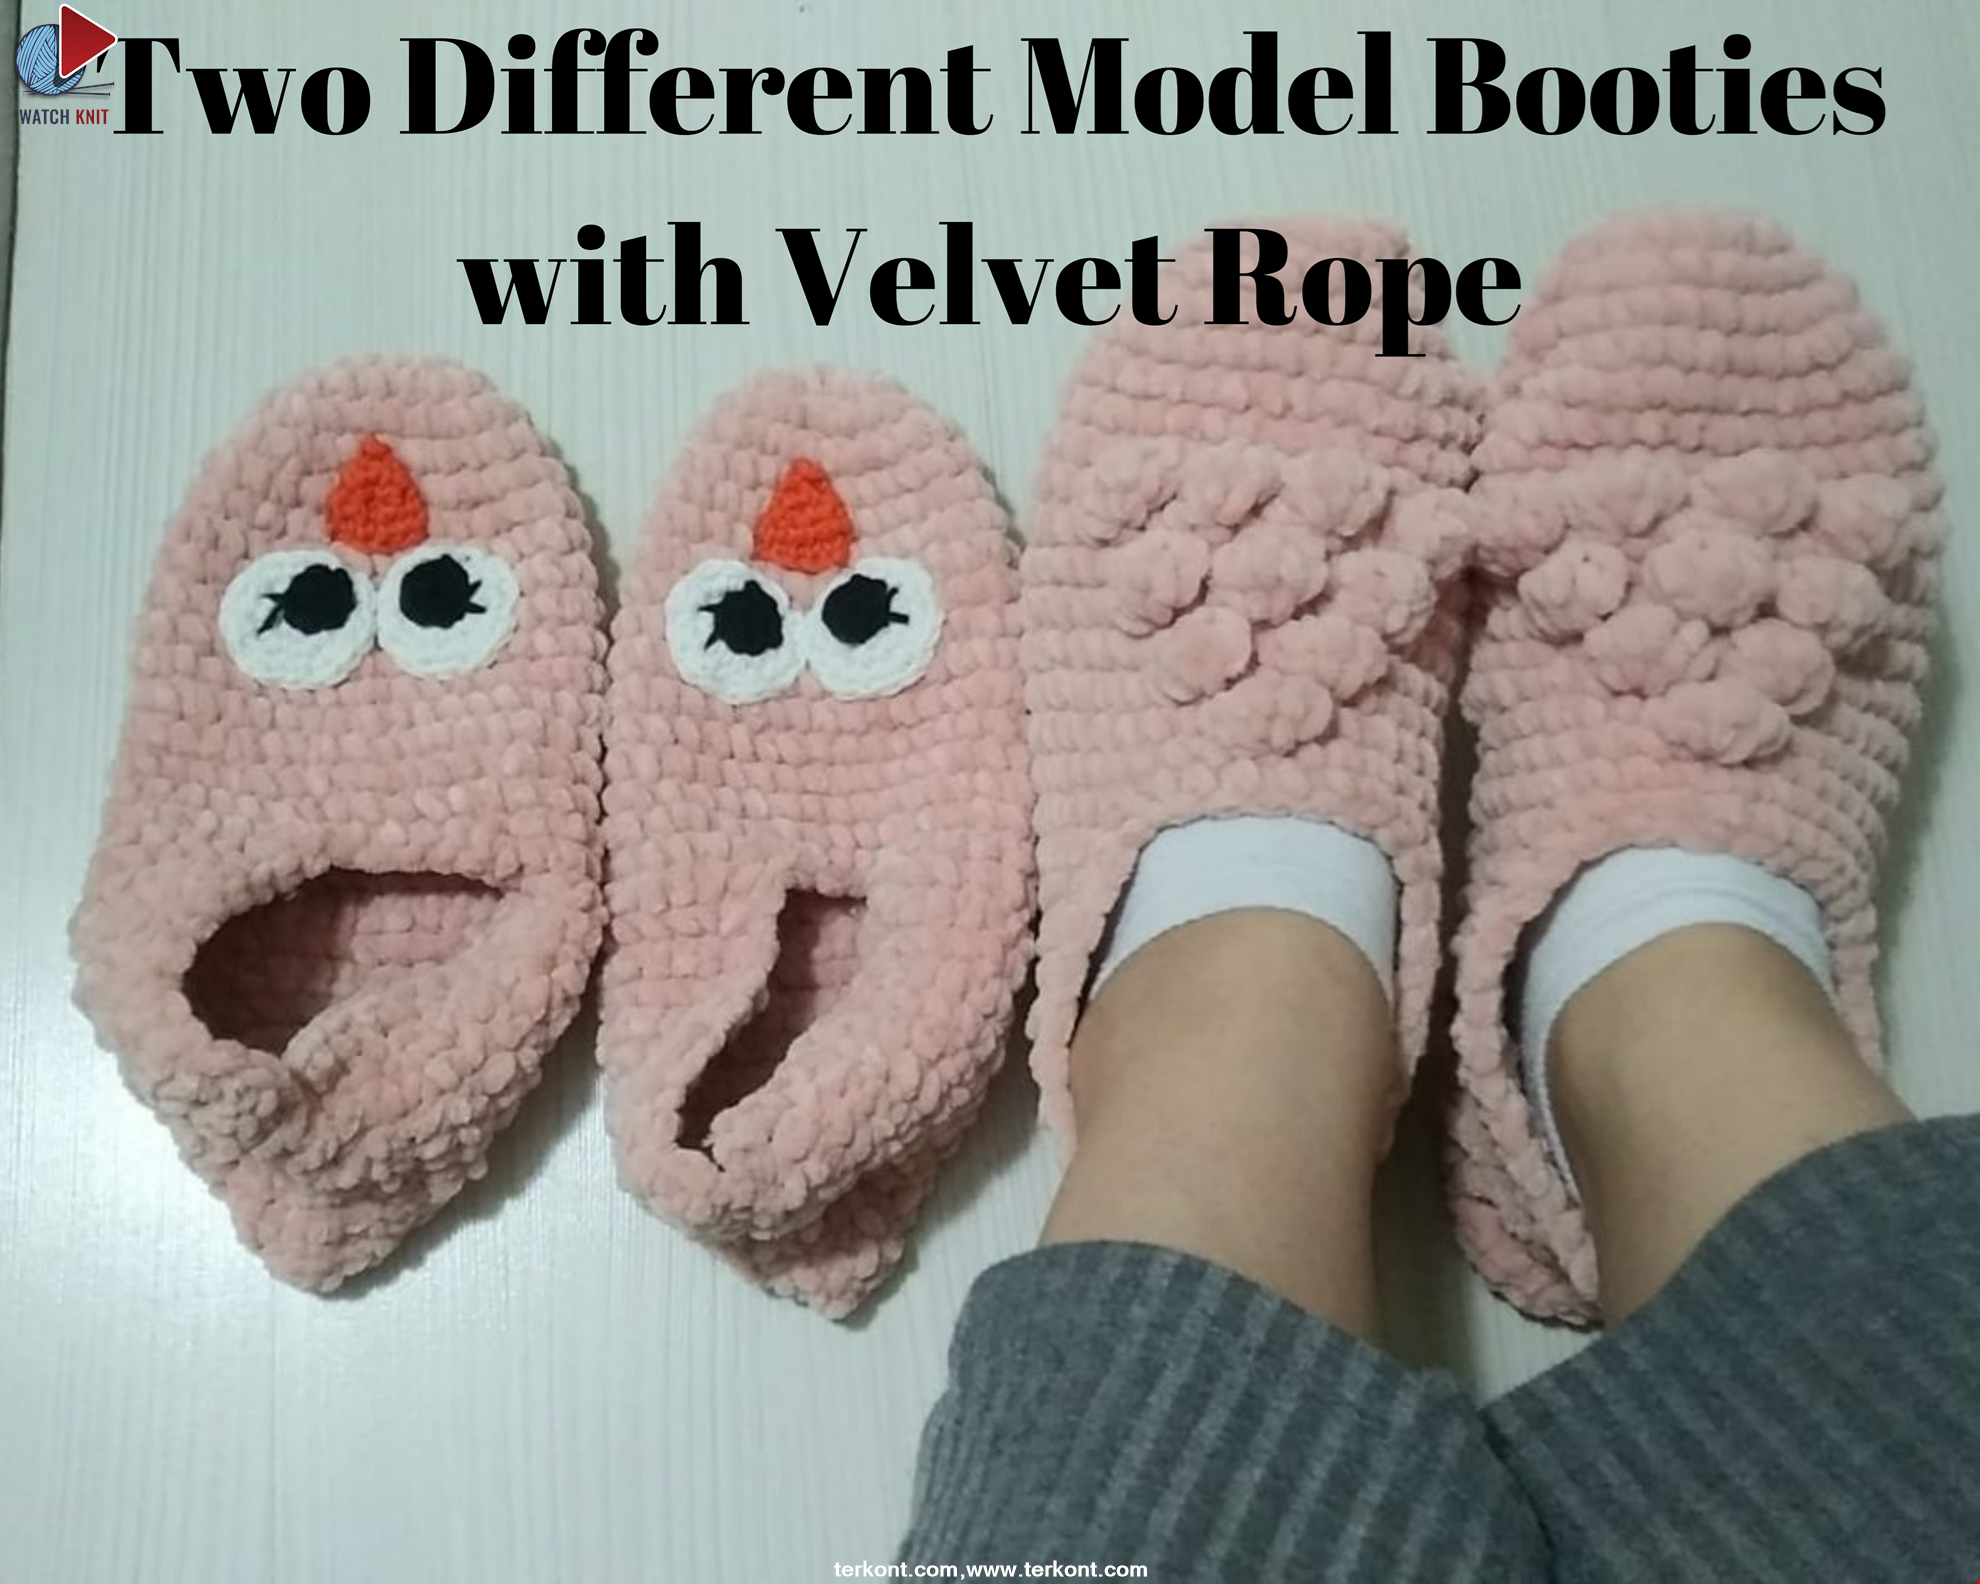 Making Two Different Model Booties with Velvet Rope and Its Recipe